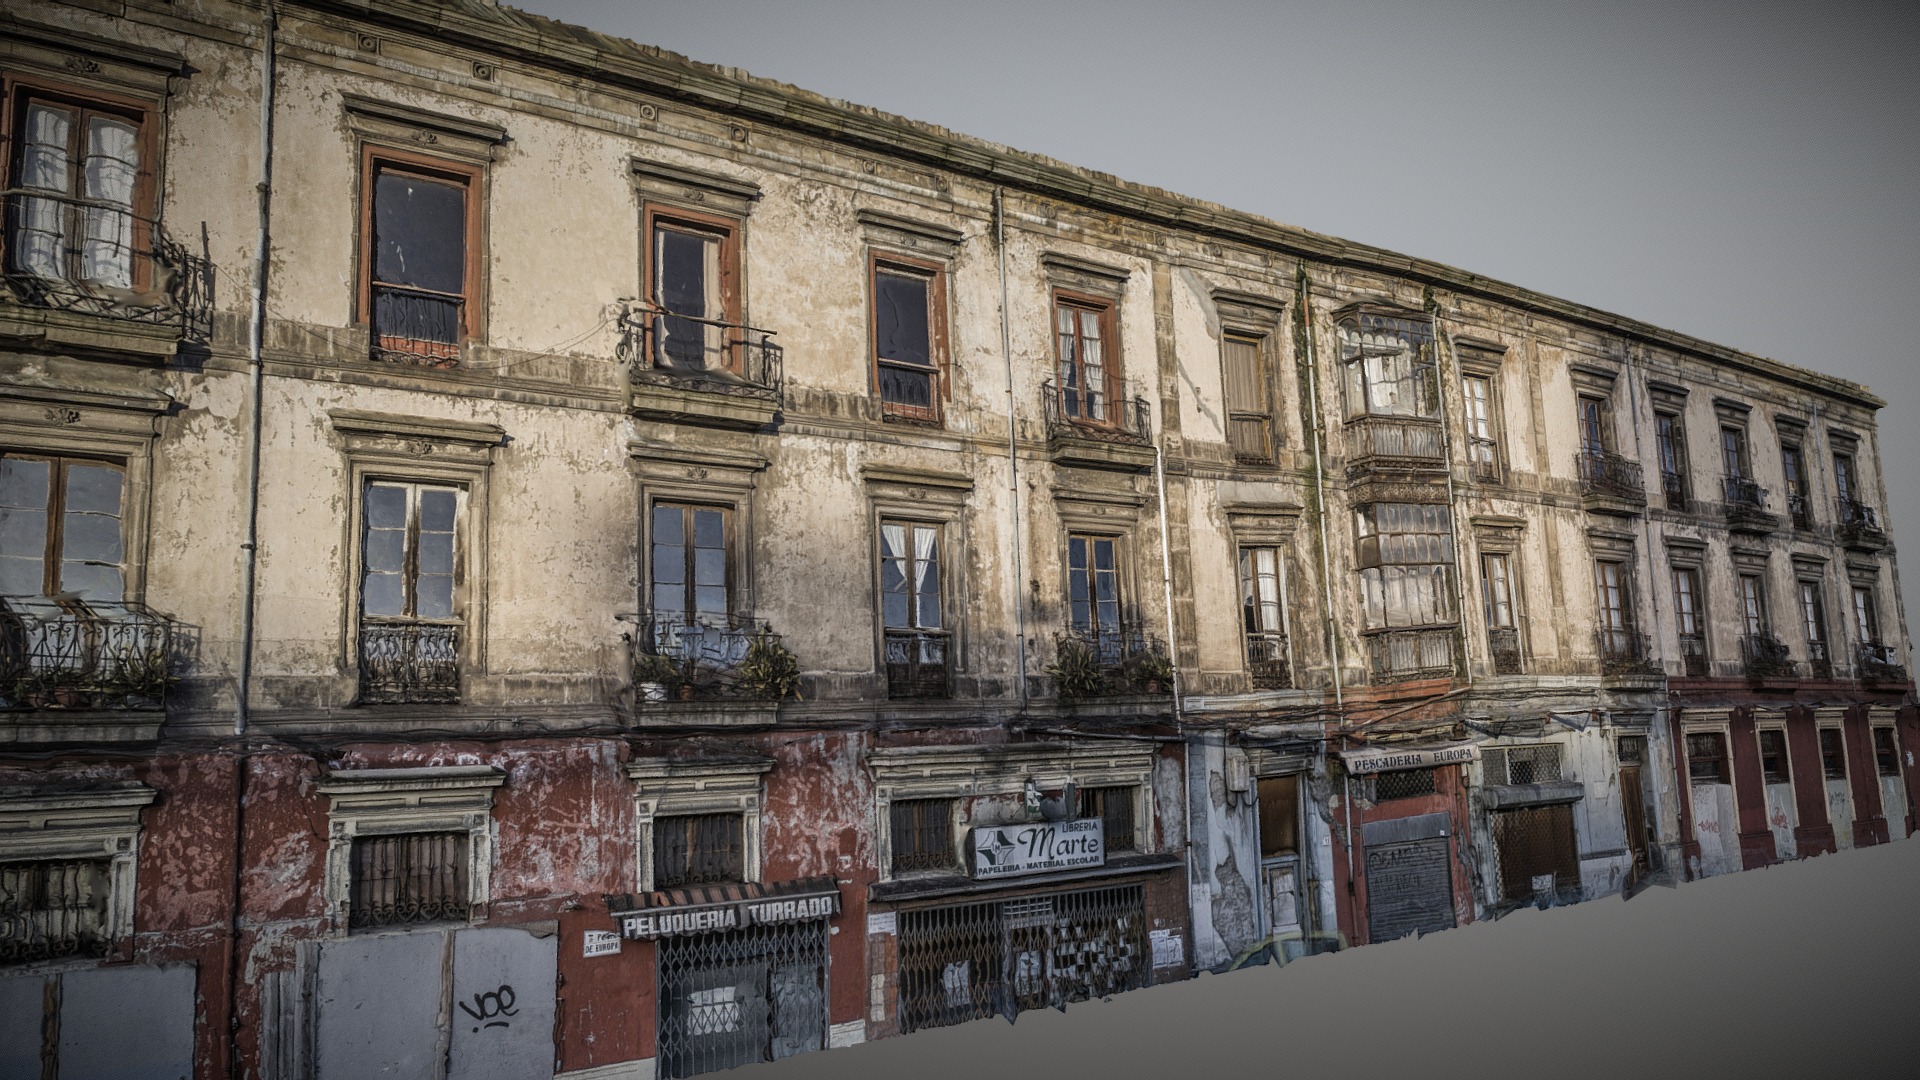 3D model Old building facade photogrammetry scan - This is a 3D model of the Old building facade photogrammetry scan. The 3D model is about a building with many windows.